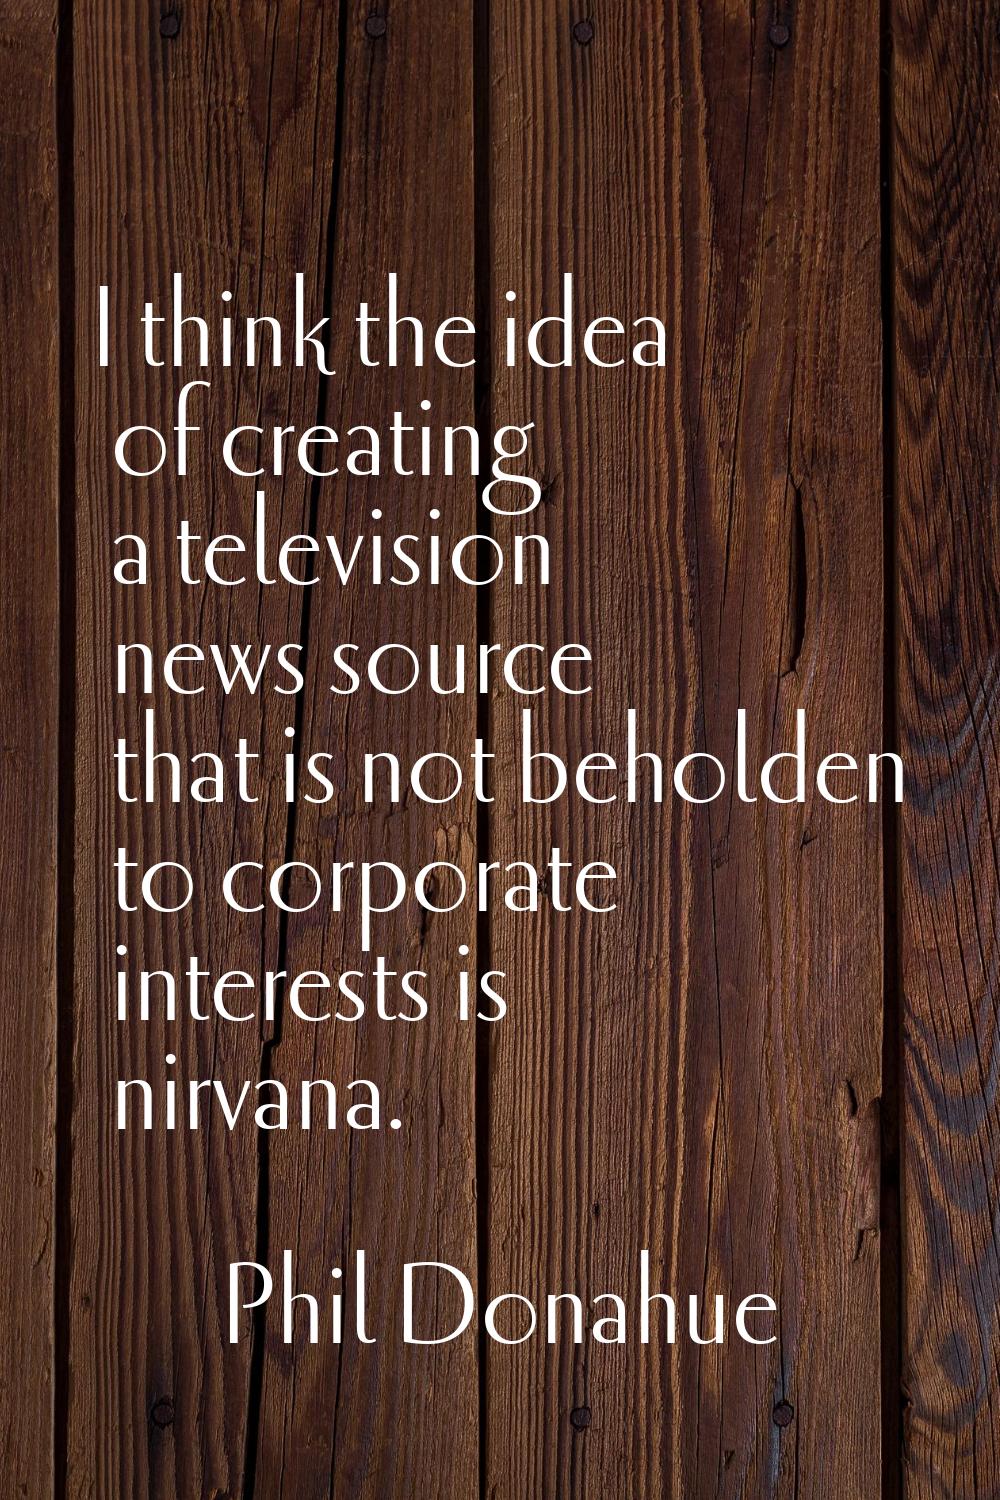 I think the idea of creating a television news source that is not beholden to corporate interests i